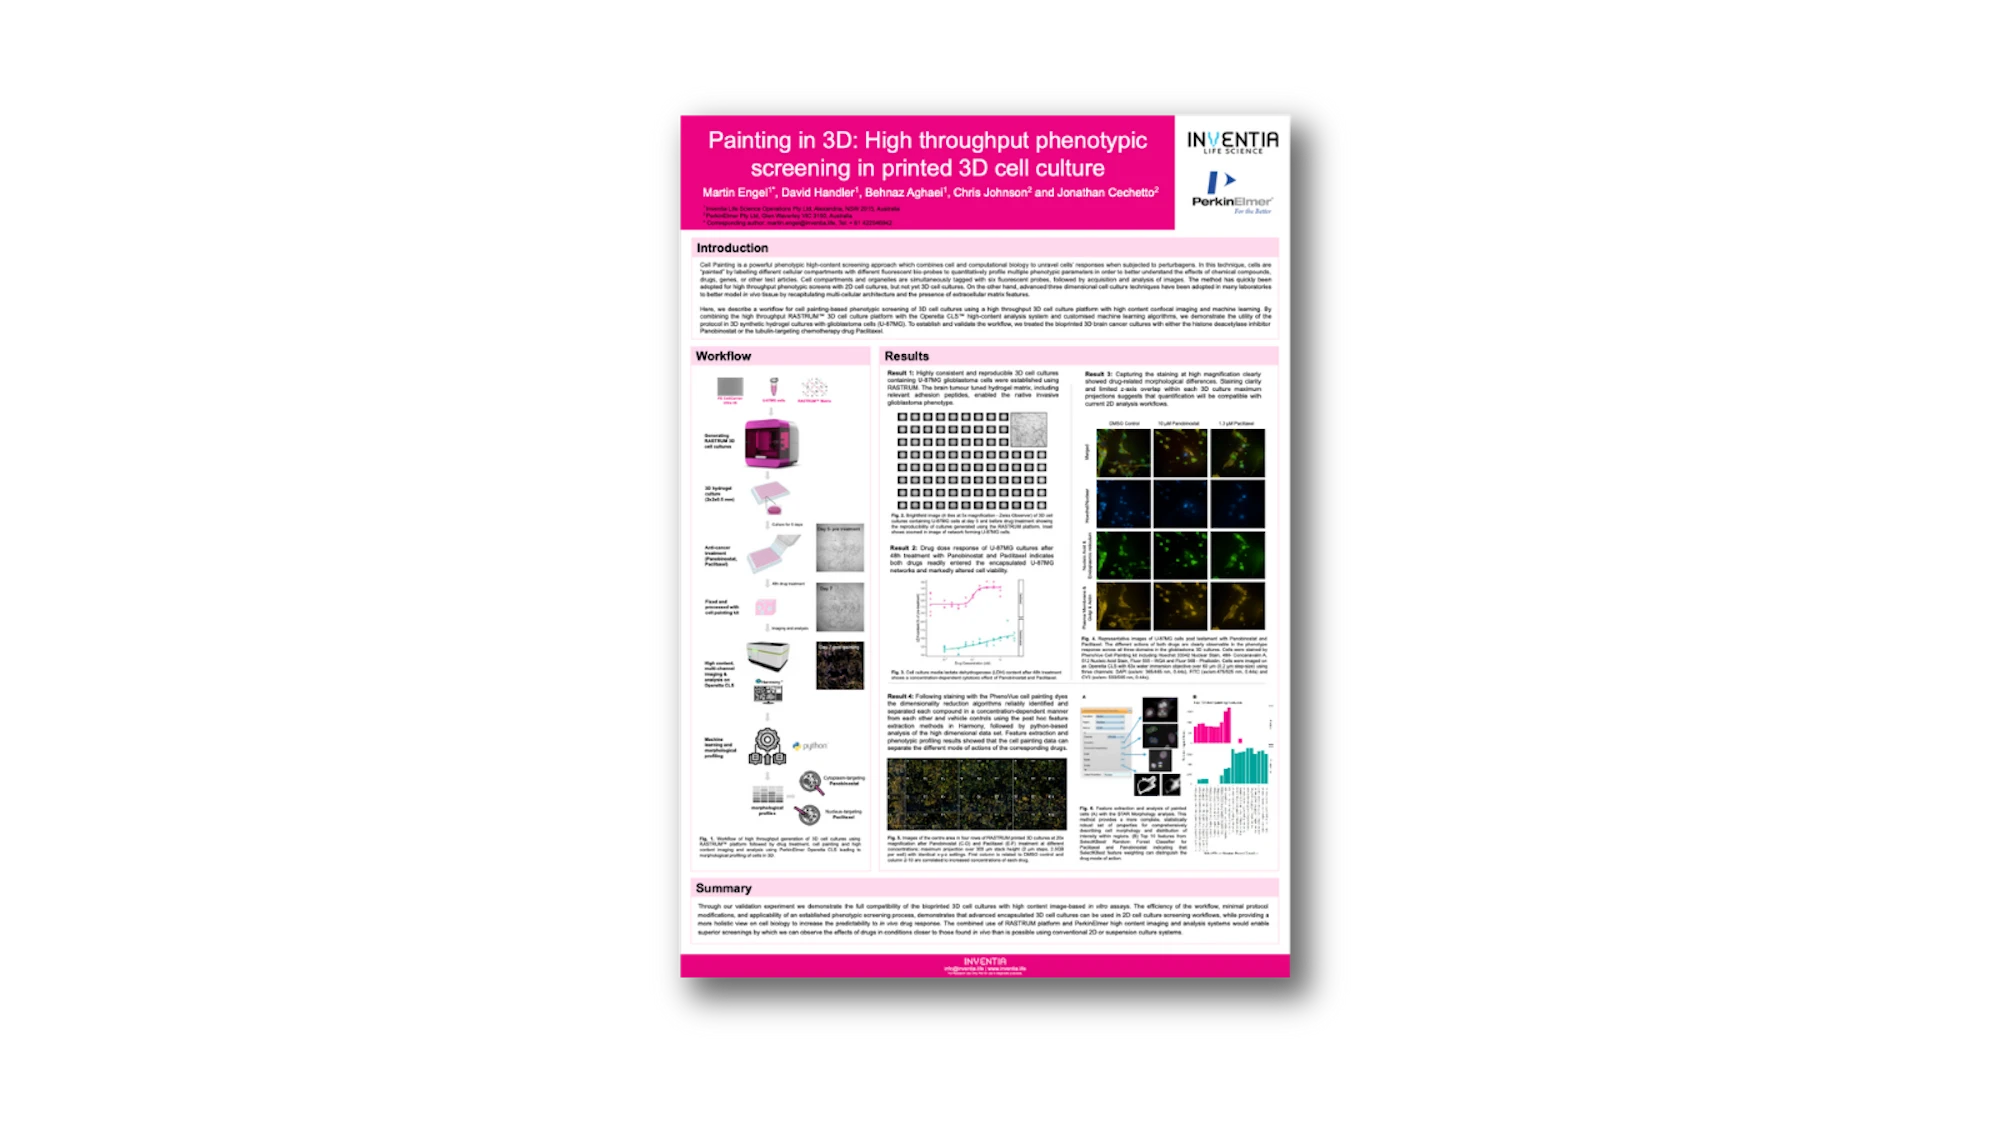 Painting in 3D: High throughput phenotypic screening in printed 3D cell culture